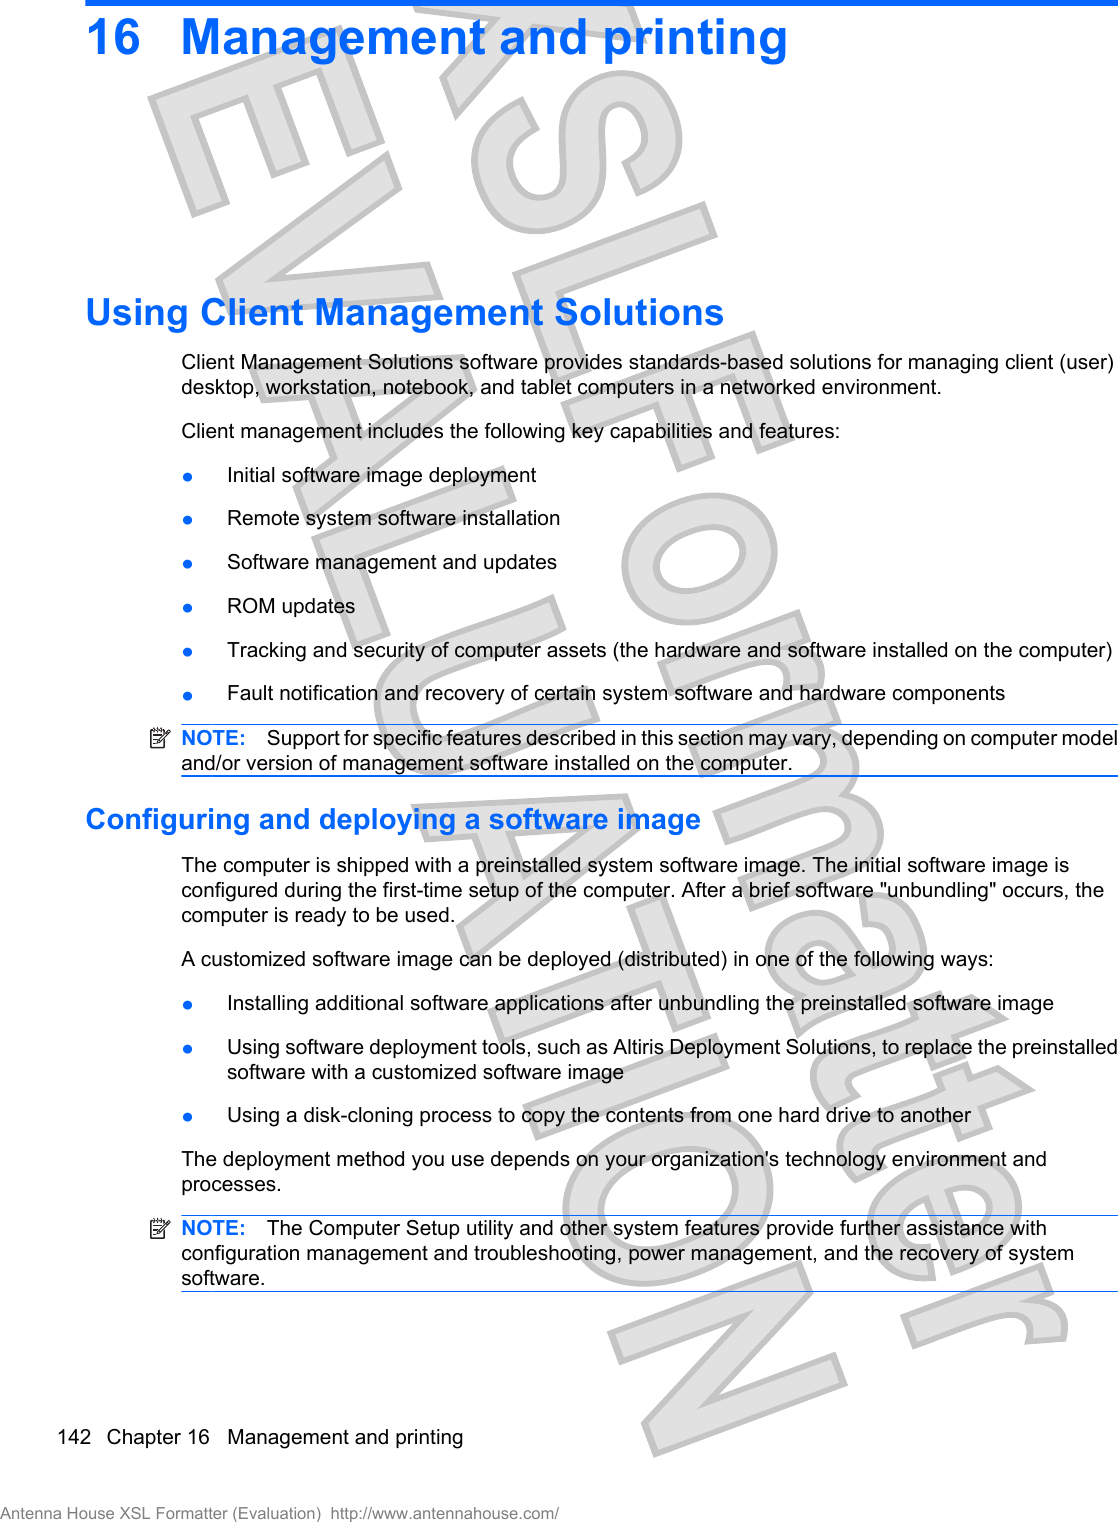 16 Management and printingUsing Client Management SolutionsClient Management Solutions software provides standards-based solutions for managing client (user)desktop, workstation, notebook, and tablet computers in a networked environment.Client management includes the following key capabilities and features:łInitial software image deploymentłRemote system software installationłSoftware management and updatesłROM updatesłTracking and security of computer assets (the hardware and software installed on the computer)łFault notification and recovery of certain system software and hardware componentsNOTE: Support for specific features described in this section may vary, depending on computer modeland/or version of management software installed on the computer.Configuring and deploying a software imageThe computer is shipped with a preinstalled system software image. The initial software image isconfigured during the first-time setup of the computer. After a brief software &quot;unbundling&quot; occurs, thecomputer is ready to be used.A customized software image can be deployed (distributed) in one of the following ways:łInstalling additional software applications after unbundling the preinstalled software imagełUsing software deployment tools, such as Altiris Deployment Solutions, to replace the preinstalledsoftware with a customized software imagełUsing a disk-cloning process to copy the contents from one hard drive to anotherThe deployment method you use depends on your organization&apos;s technology environment andprocesses.NOTE: The Computer Setup utility and other system features provide further assistance withconfiguration management and troubleshooting, power management, and the recovery of systemsoftware.142 Chapter 16   Management and printingAntenna House XSL Formatter (Evaluation)  http://www.antennahouse.com/